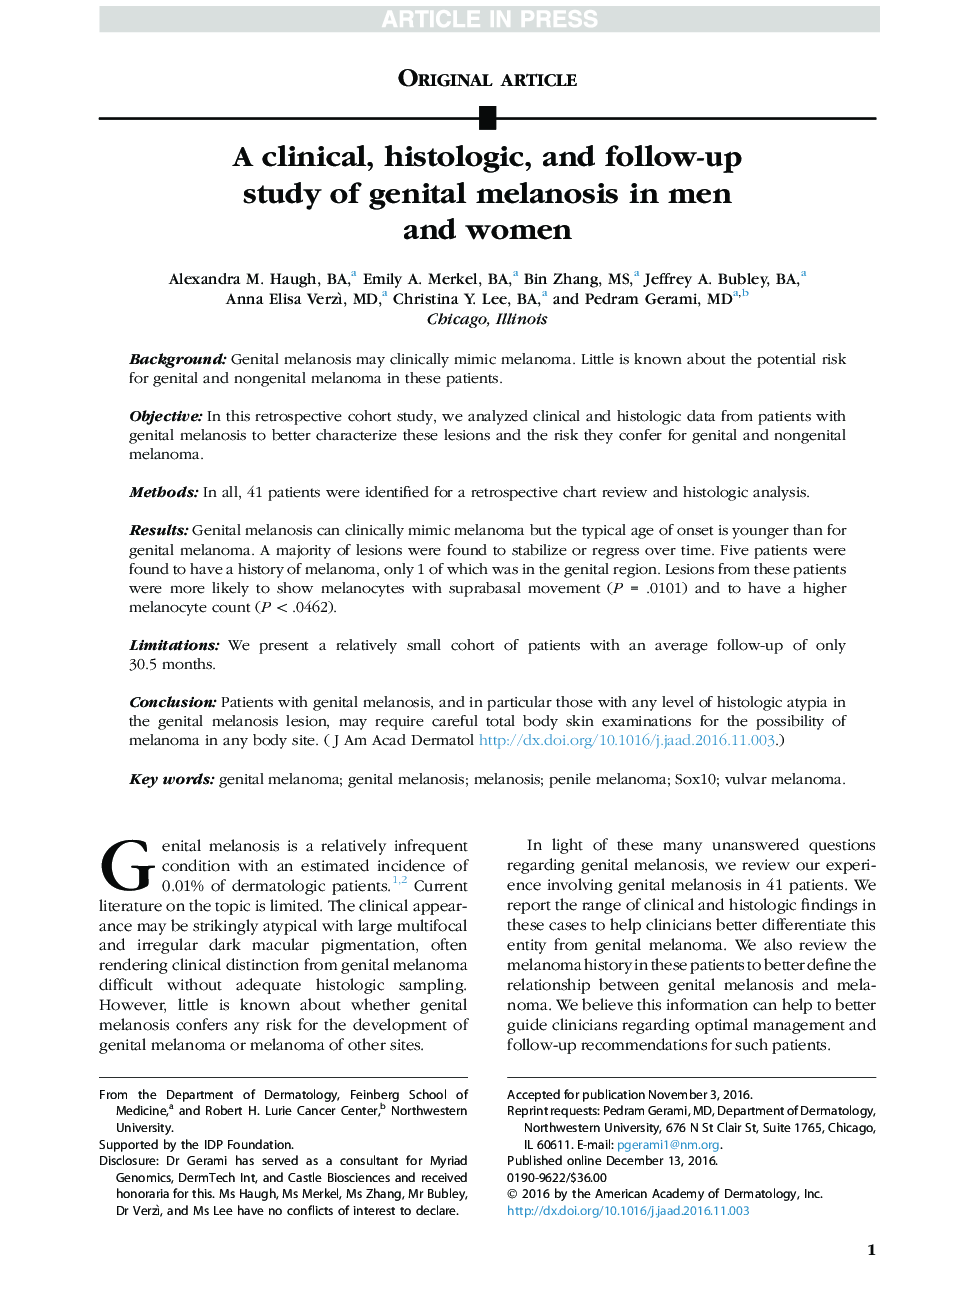 A clinical, histologic, and follow-up study of genital melanosis in men and women